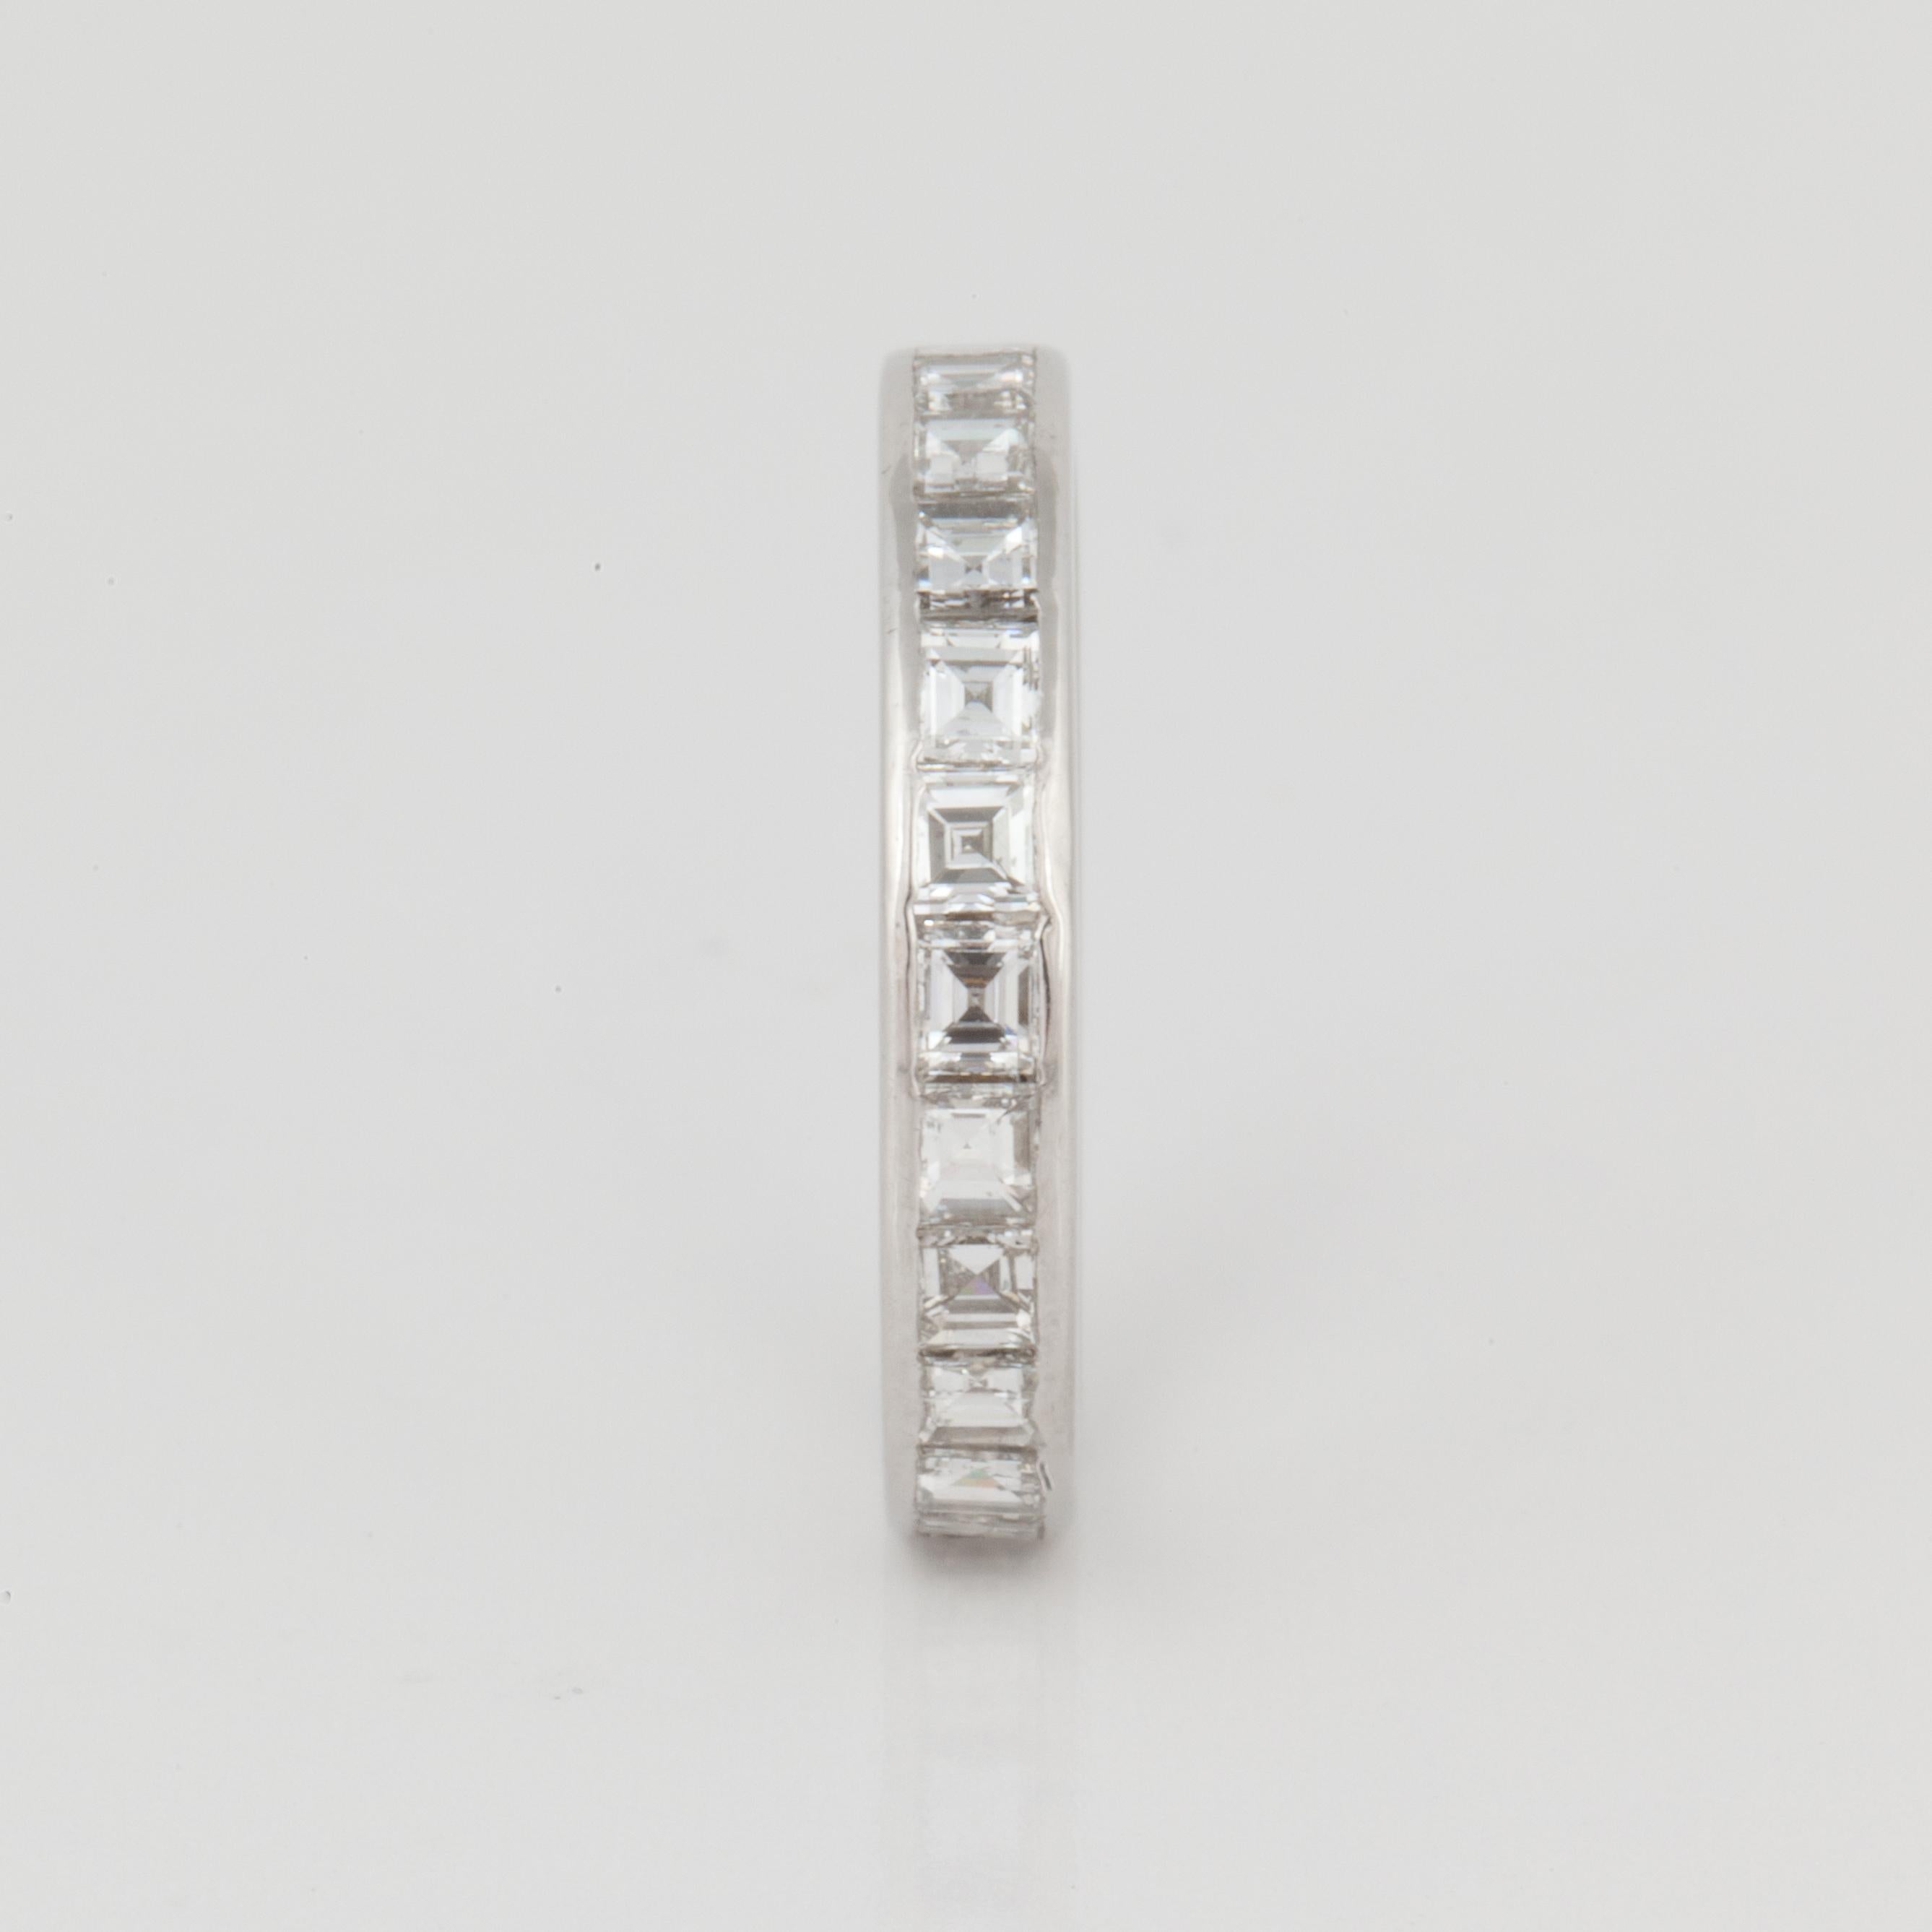 Diamond eternity band in platinum featuring emerald-cut diamonds.  There are twenty-four (24) diamonds totaling 2.80 carats; G-H color and VVS2-VS1 clarity.  The ring is a size 6 3/4 and measures 1/8 inch wide.